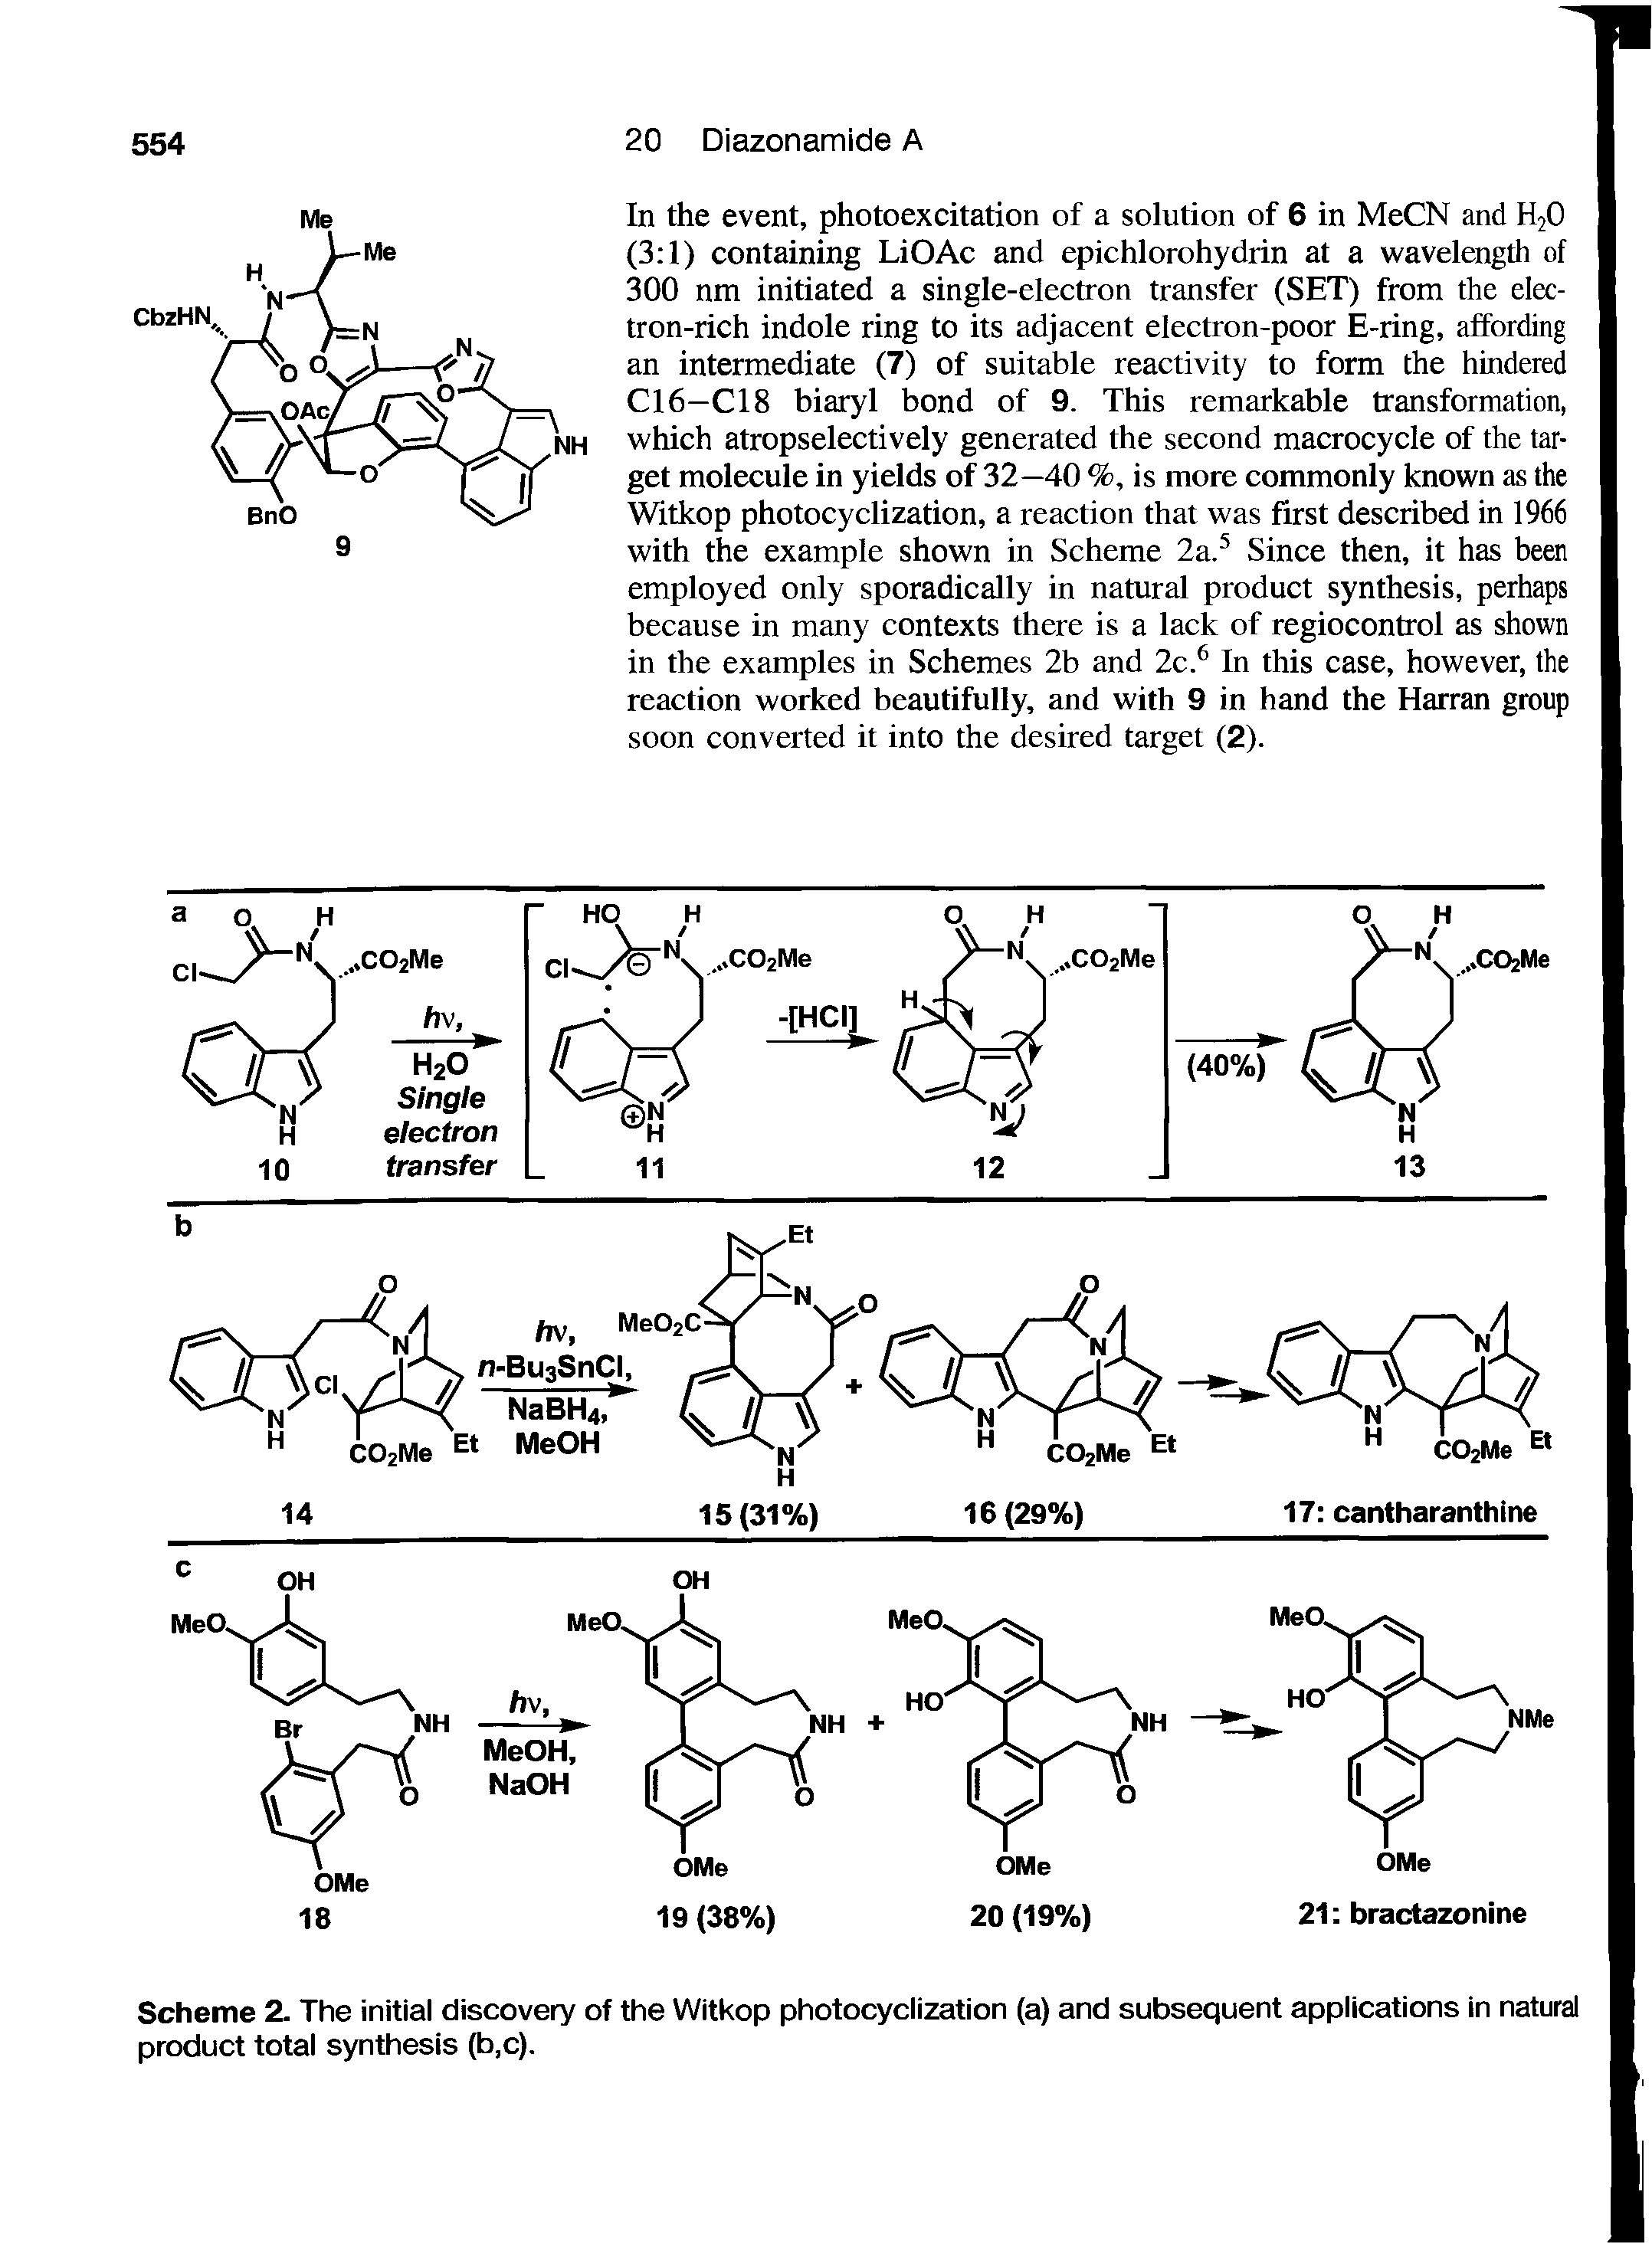 Scheme 2. The initial discovery of the Witkop photocyclization (a) and subsequent applications in natural product total synthesis (b,c).